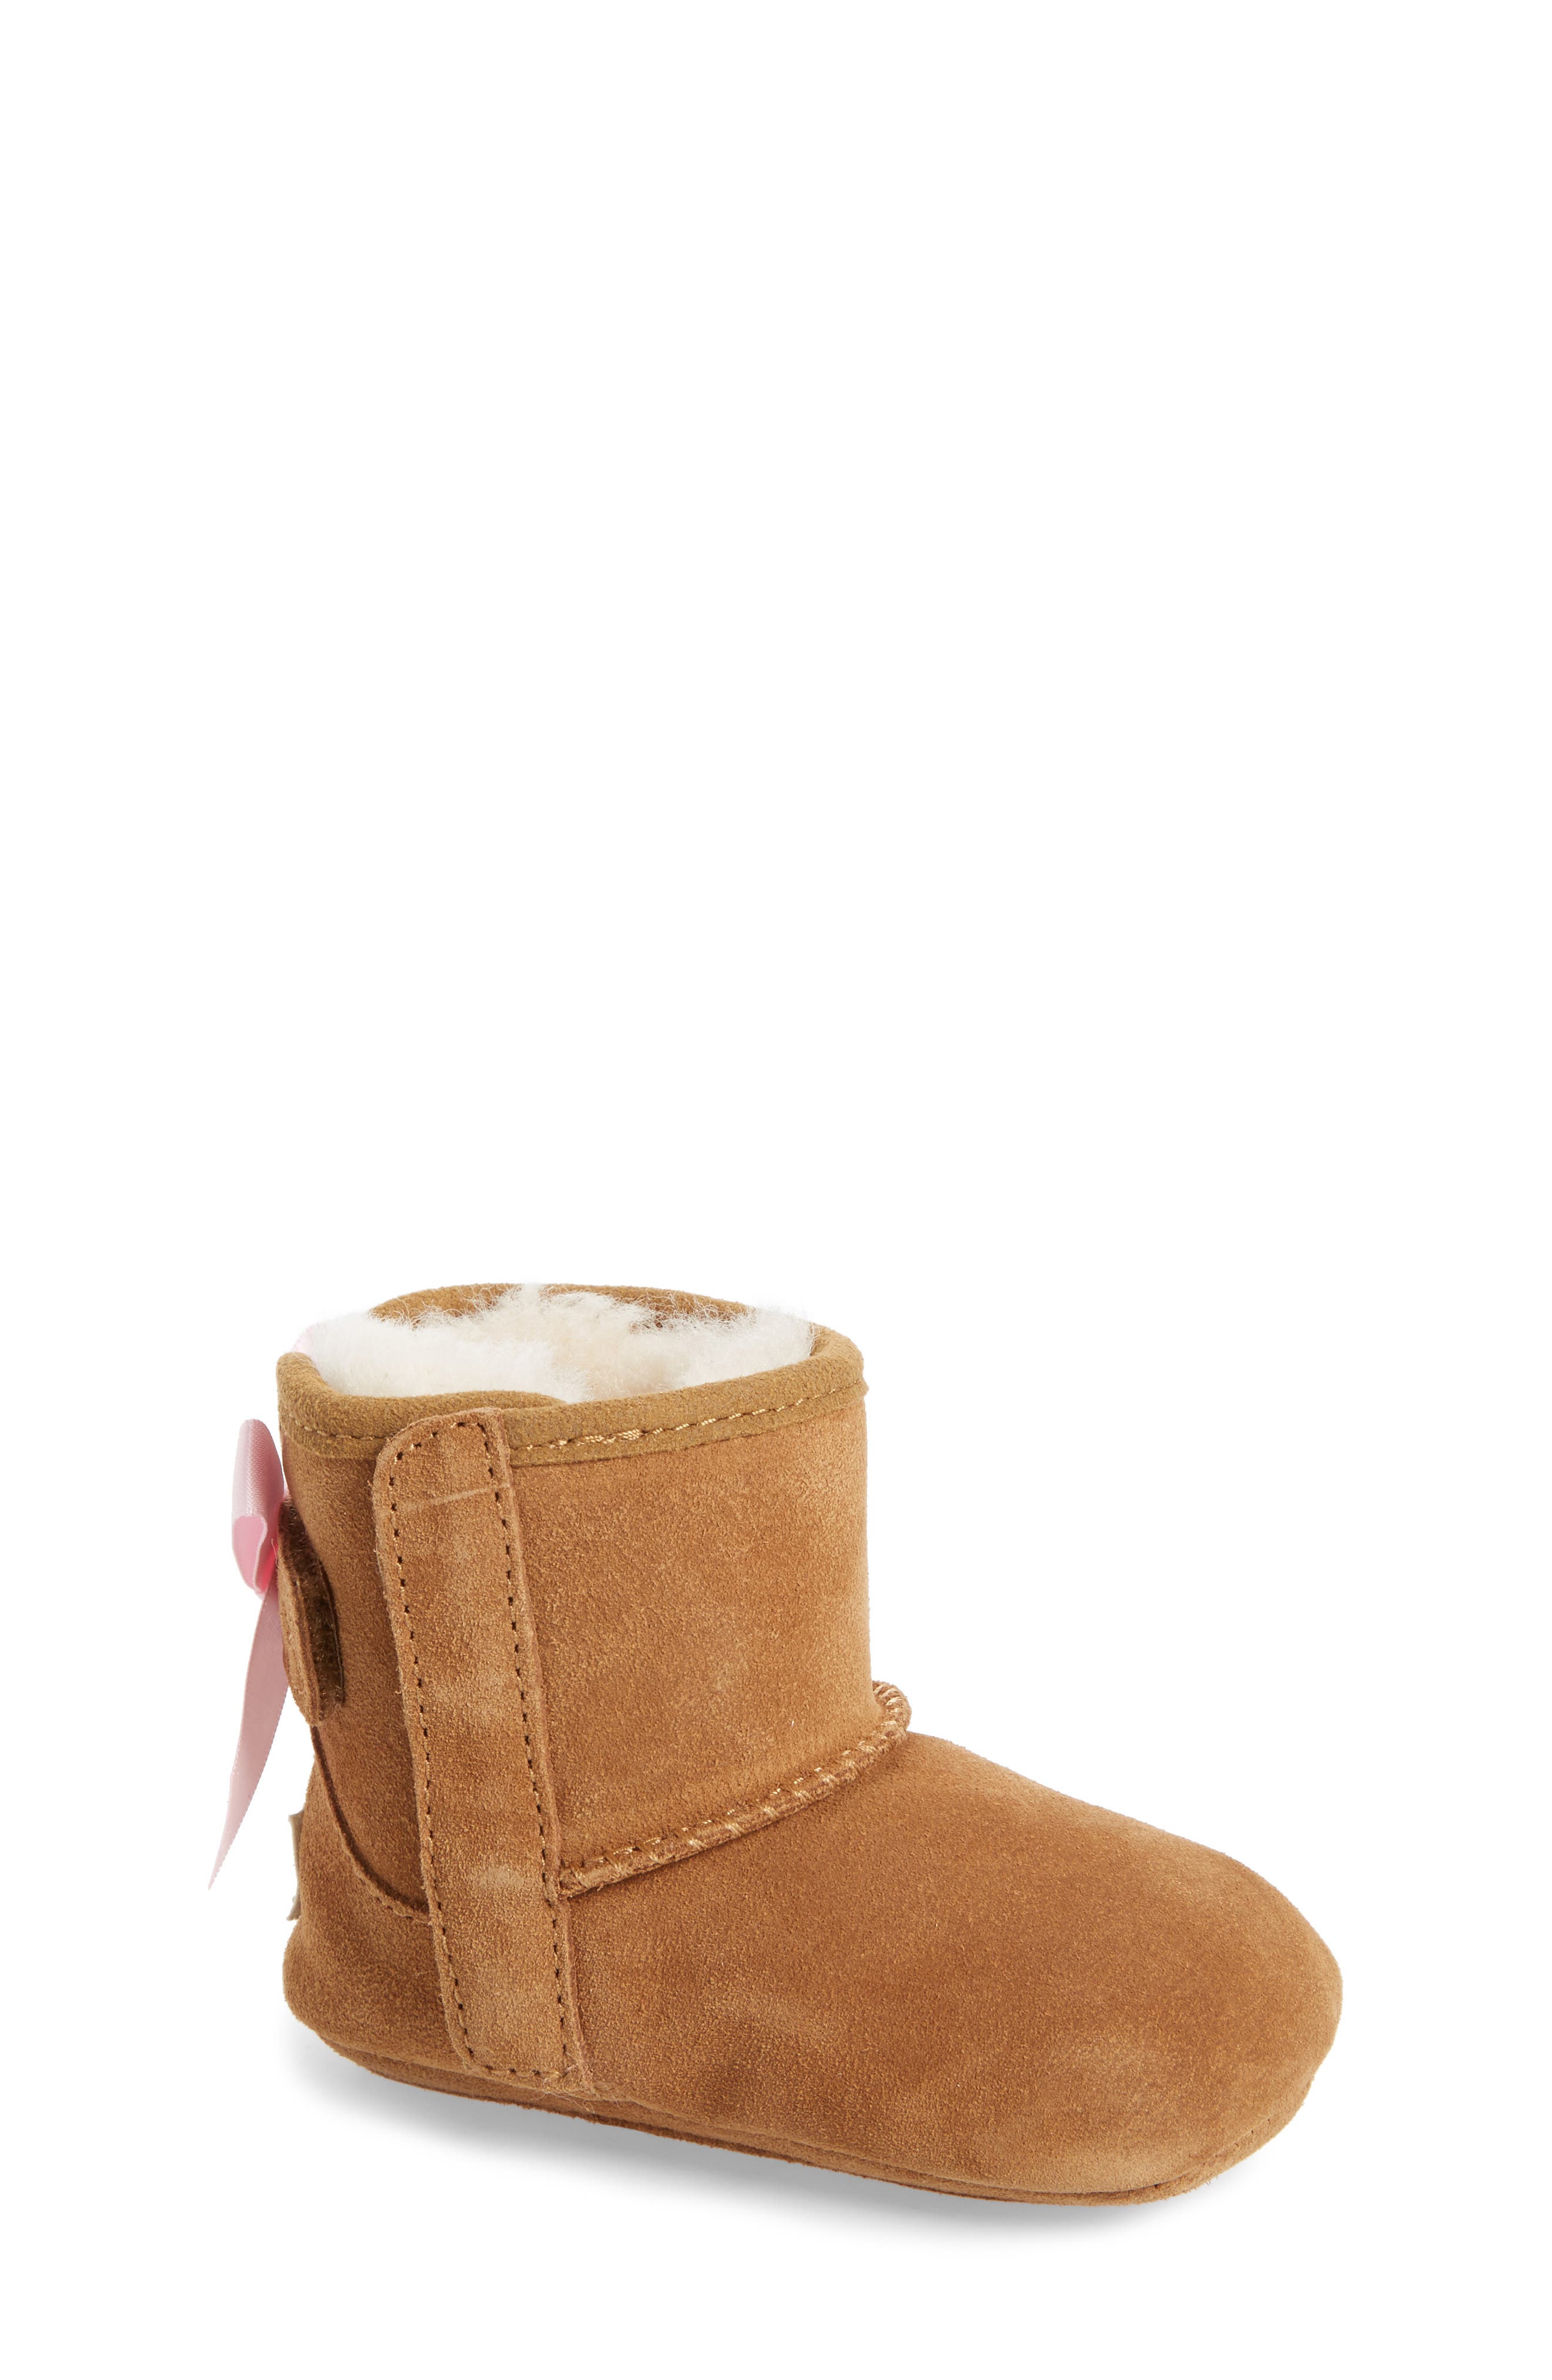 junior ugg boots size 4